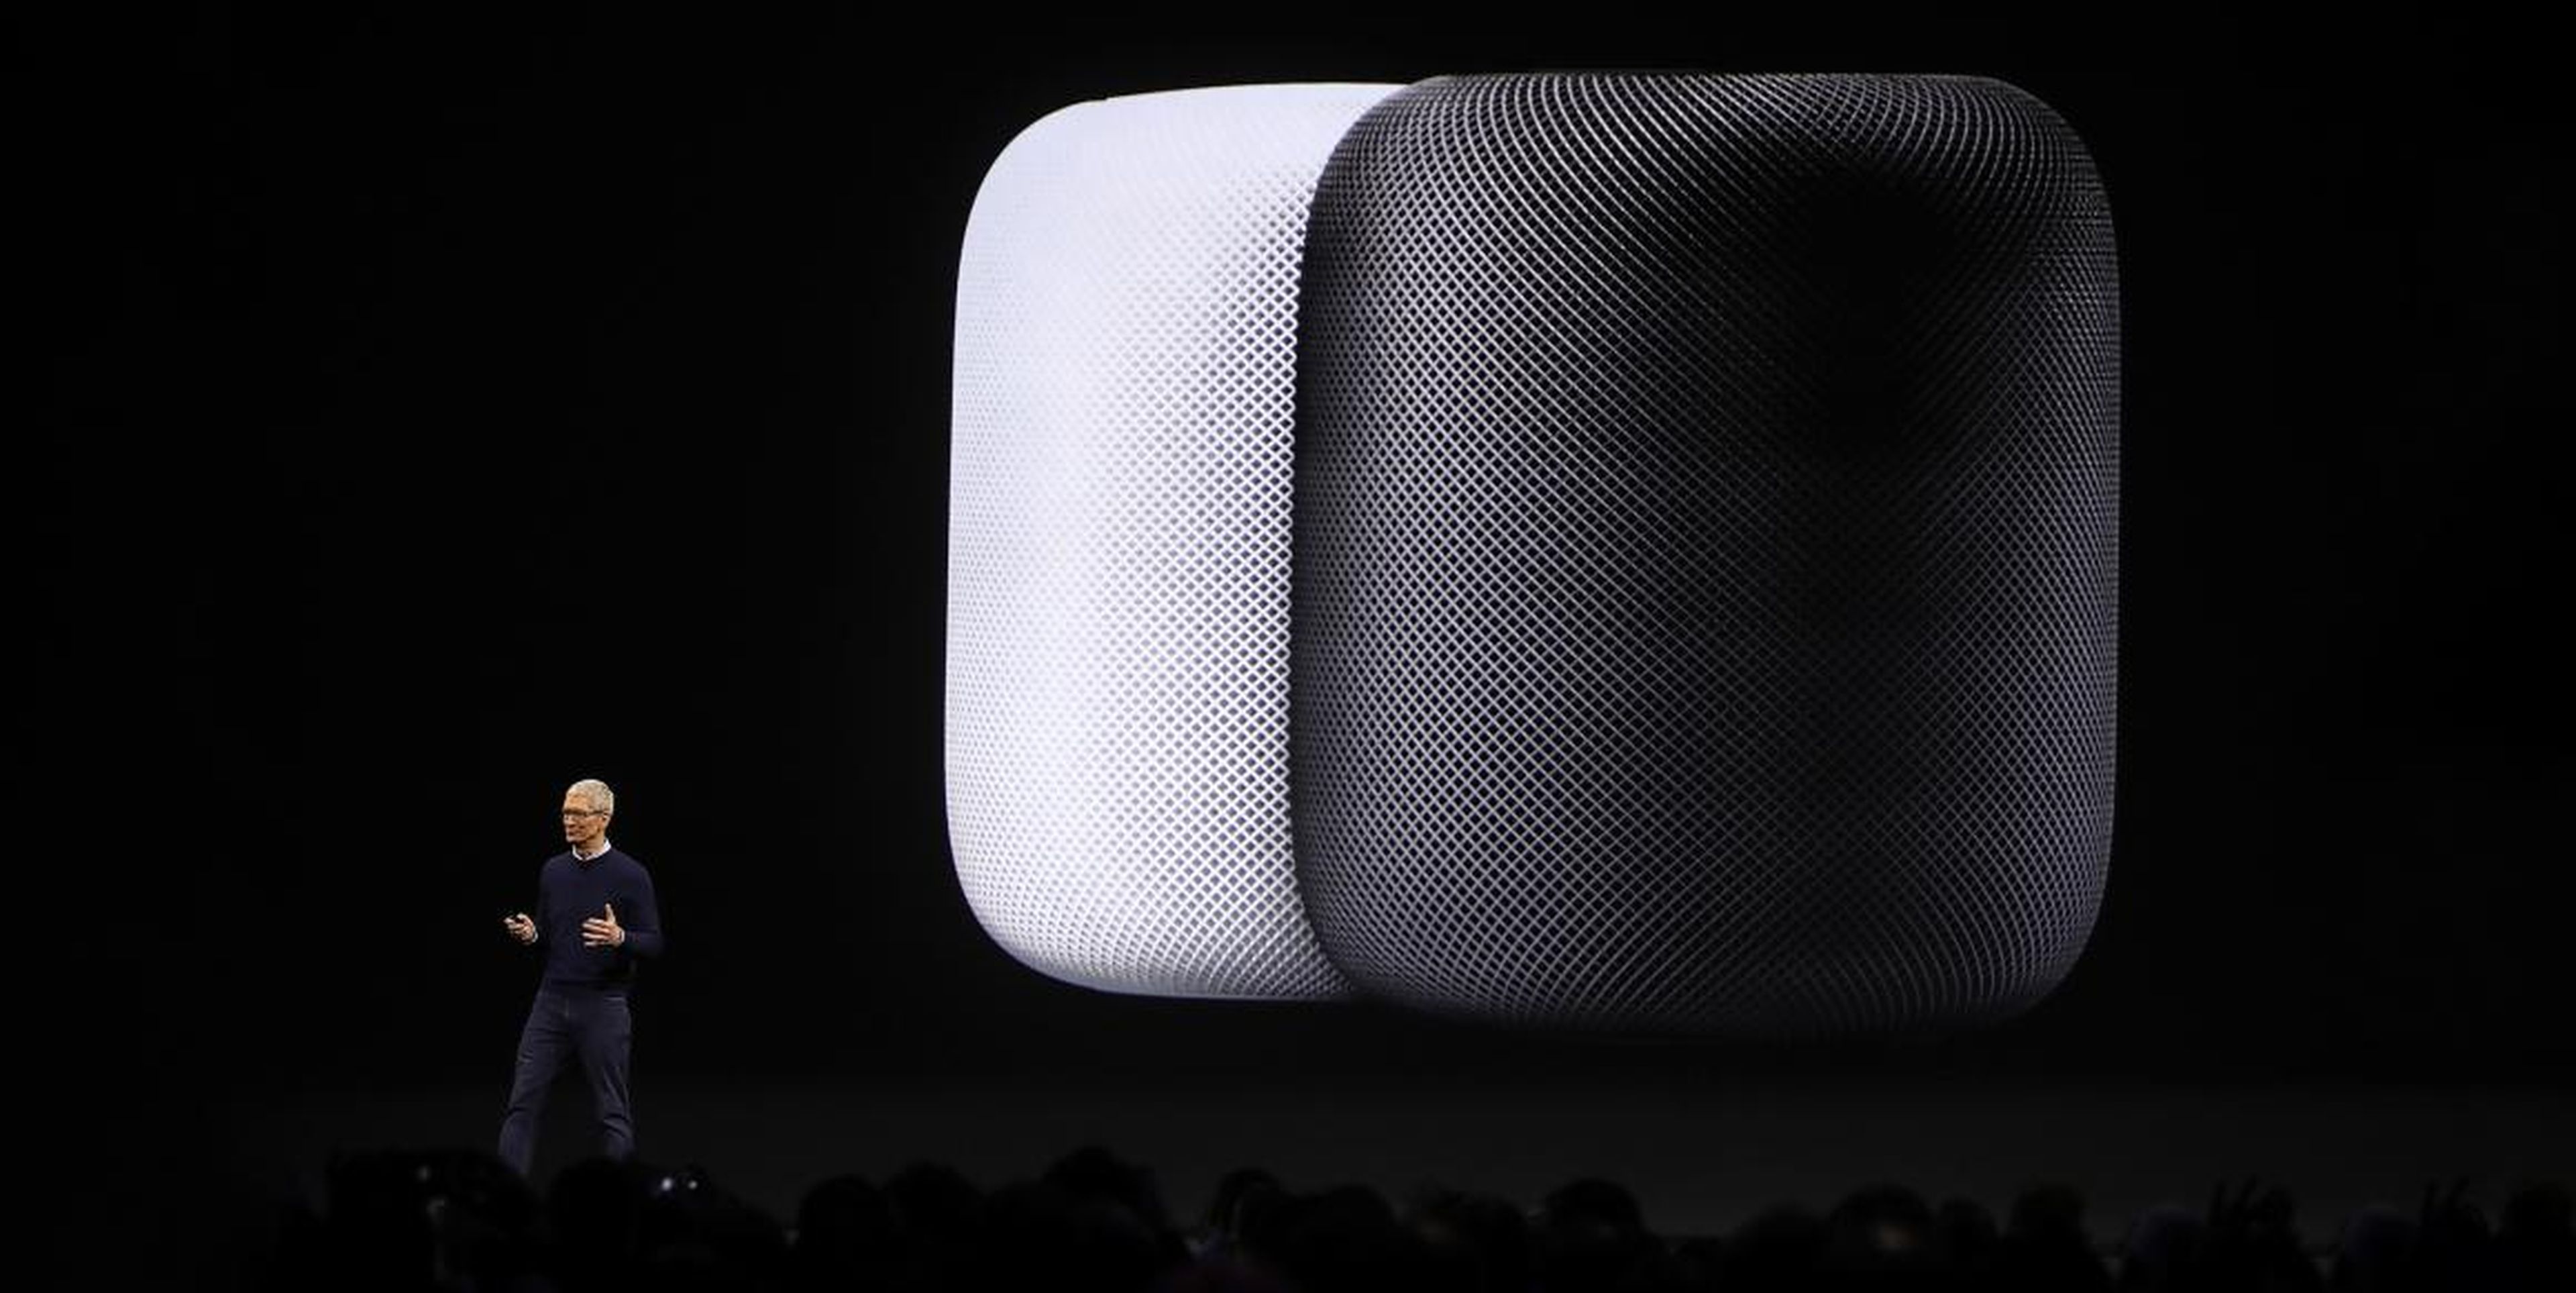 Apple CEO Tim Cook at the HomePod's unveiling during the company's annual WWDC conference.